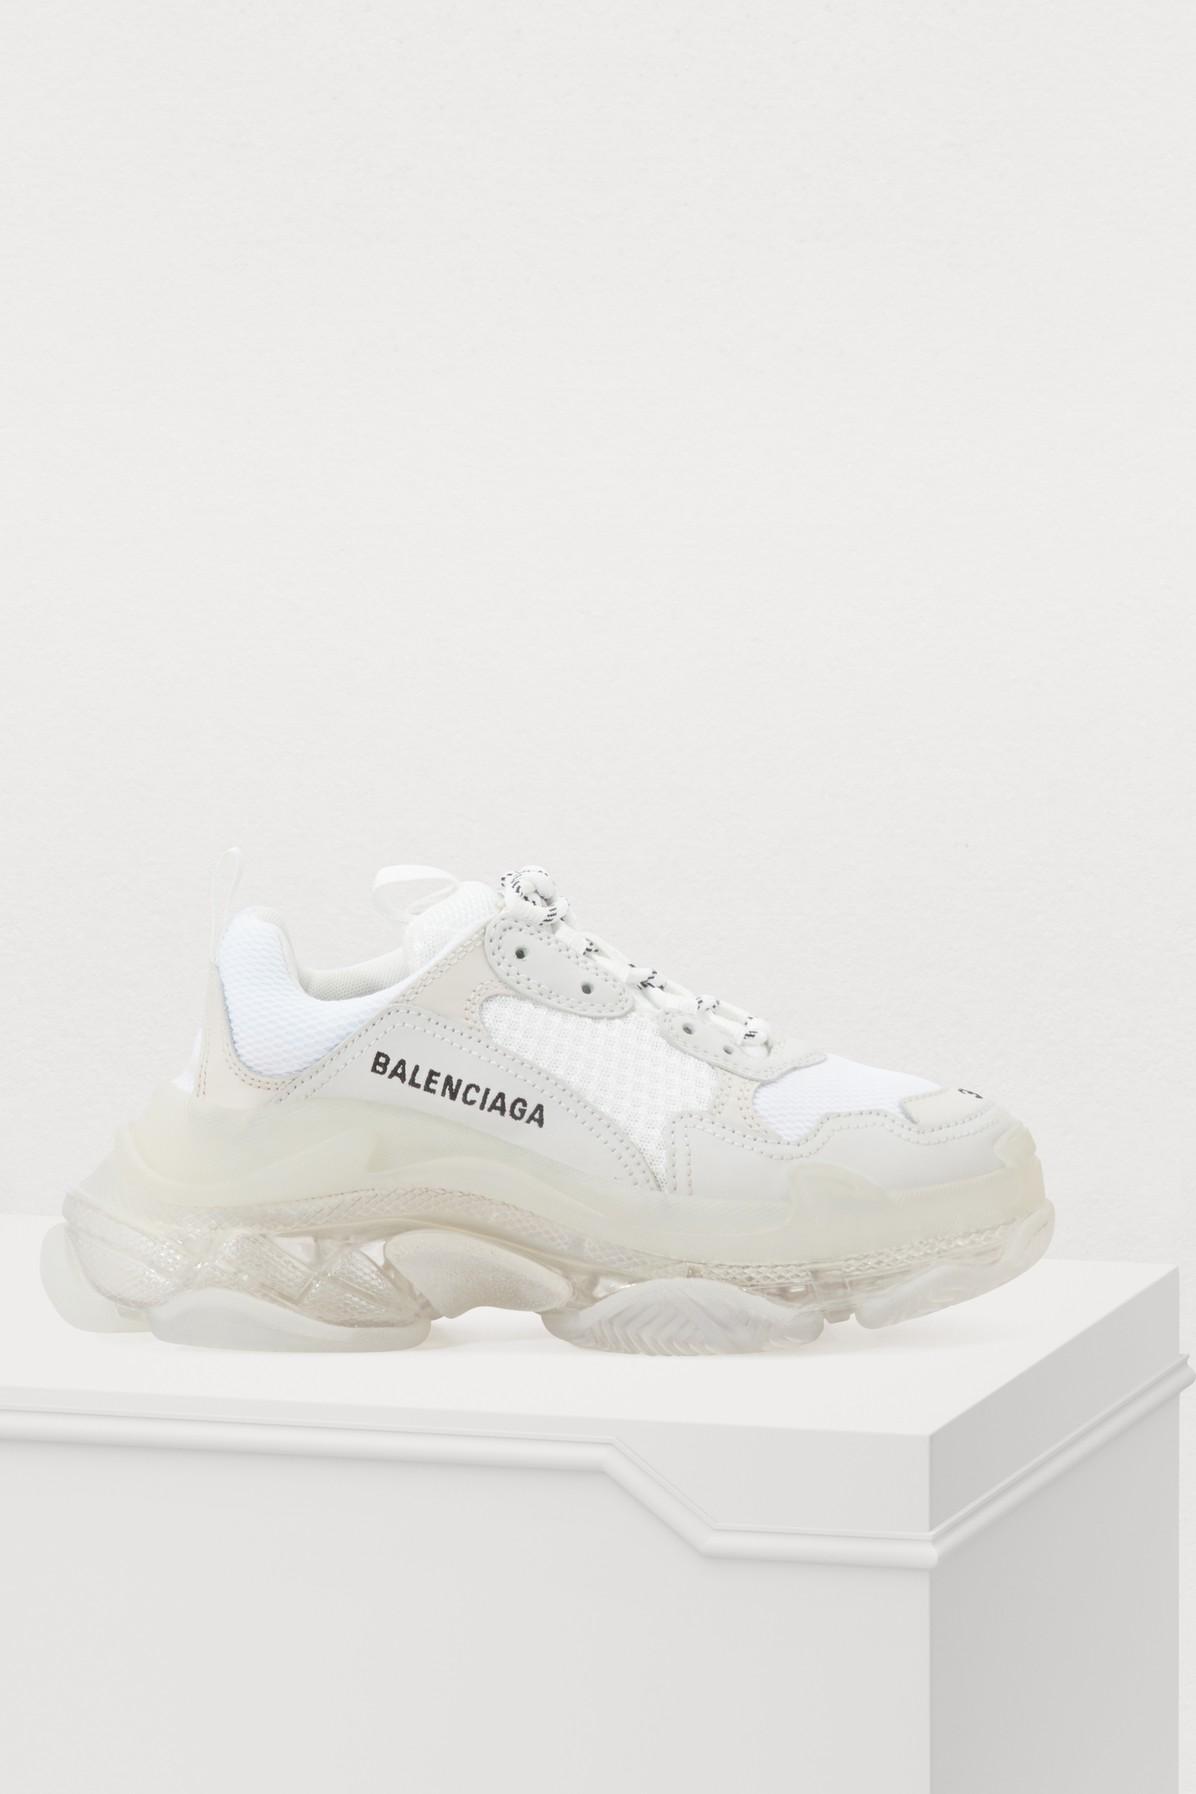 Balenciaga White Triple S Clear Sole Sneakers in White - Save 25% - Lyst